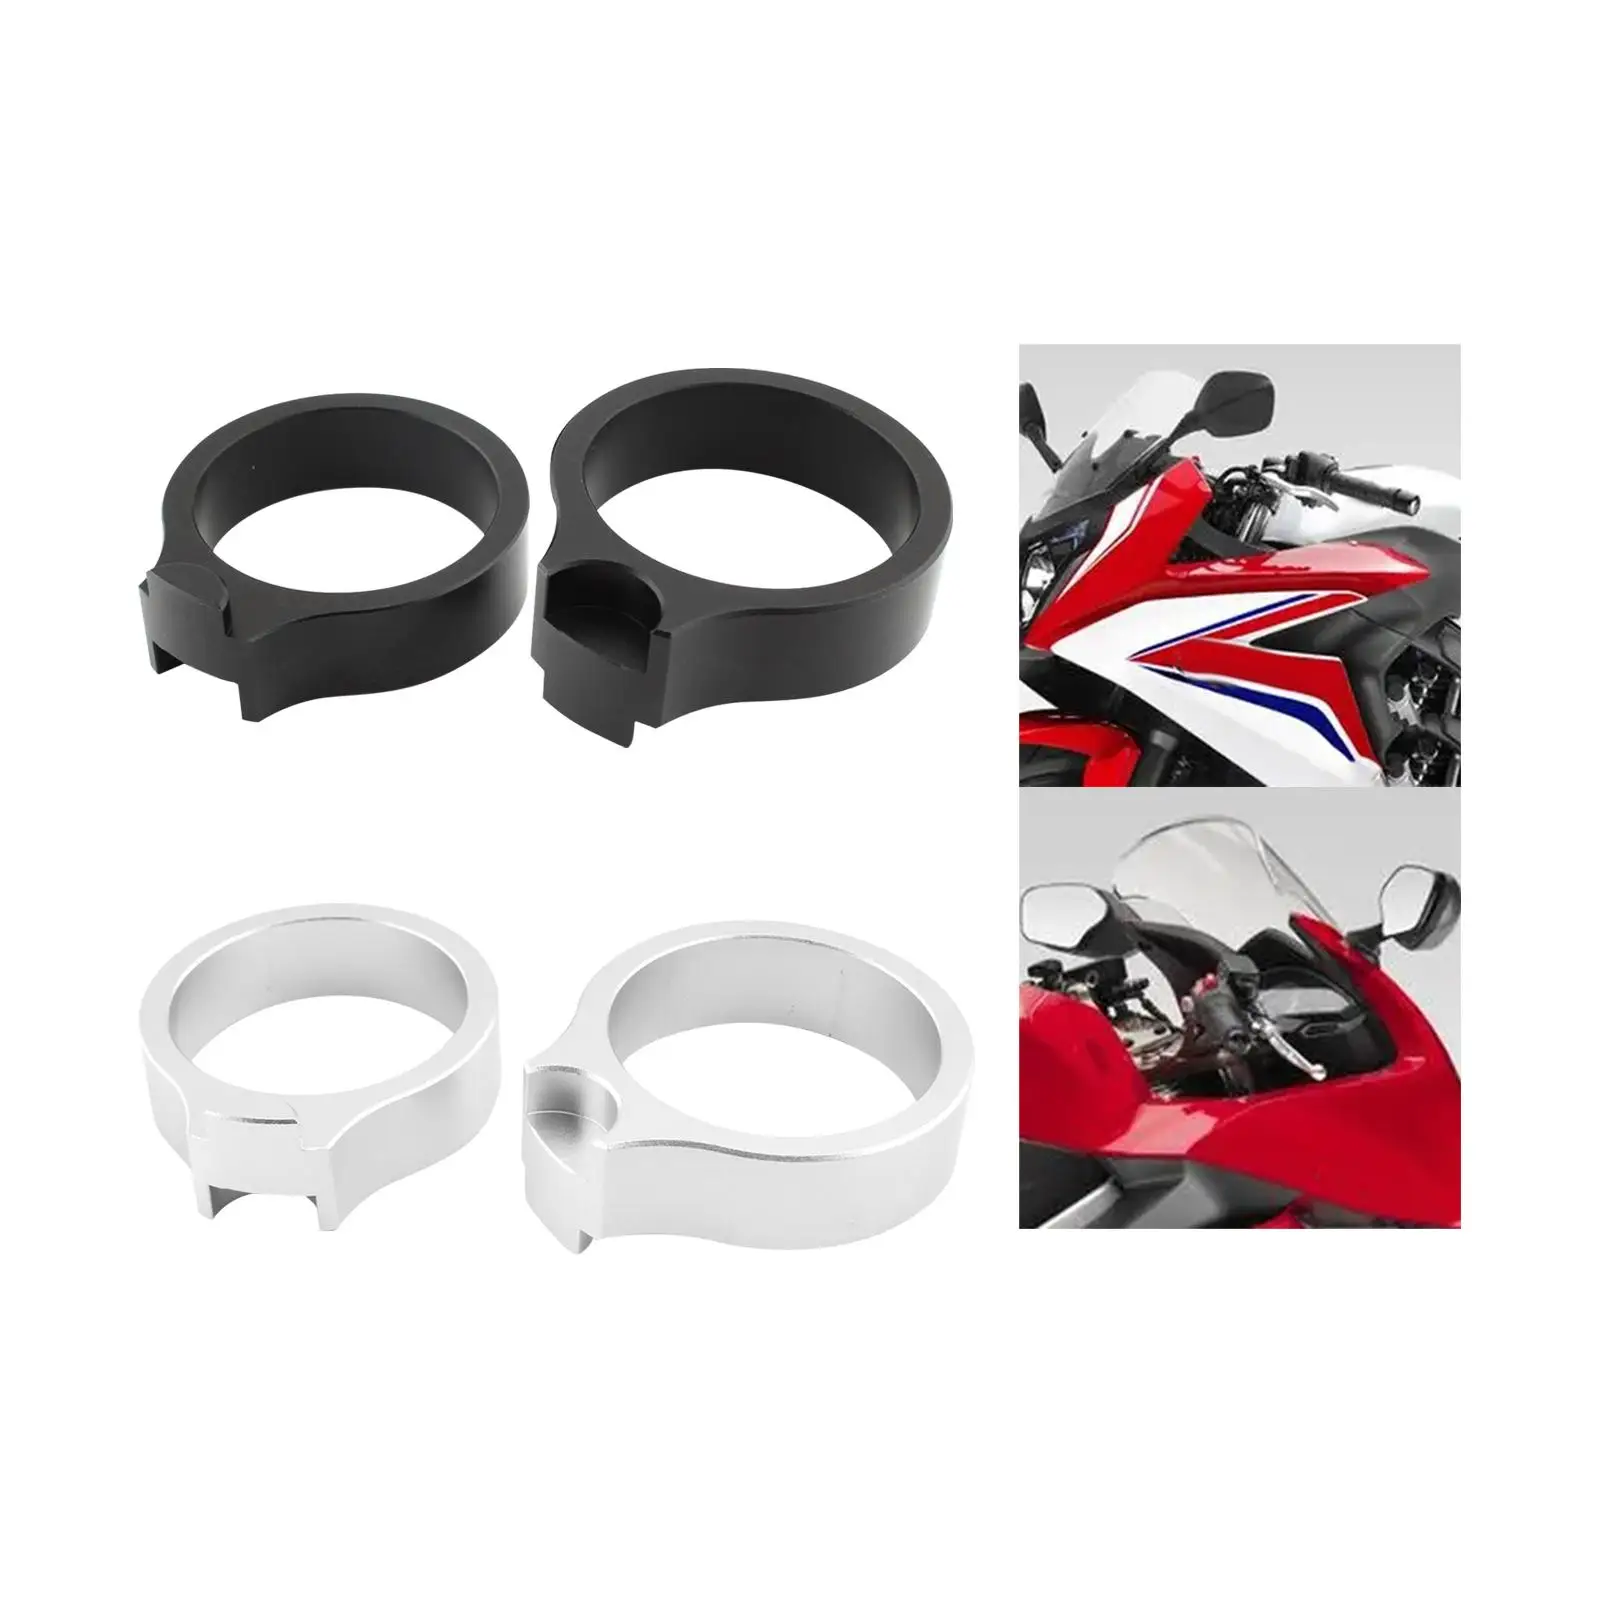 2 Pieces Motorcycle Handlebar Risers Mounting Hardware Handlebar Risers Mount Clamp for Honda CBR600F 43mm Fork Bikes